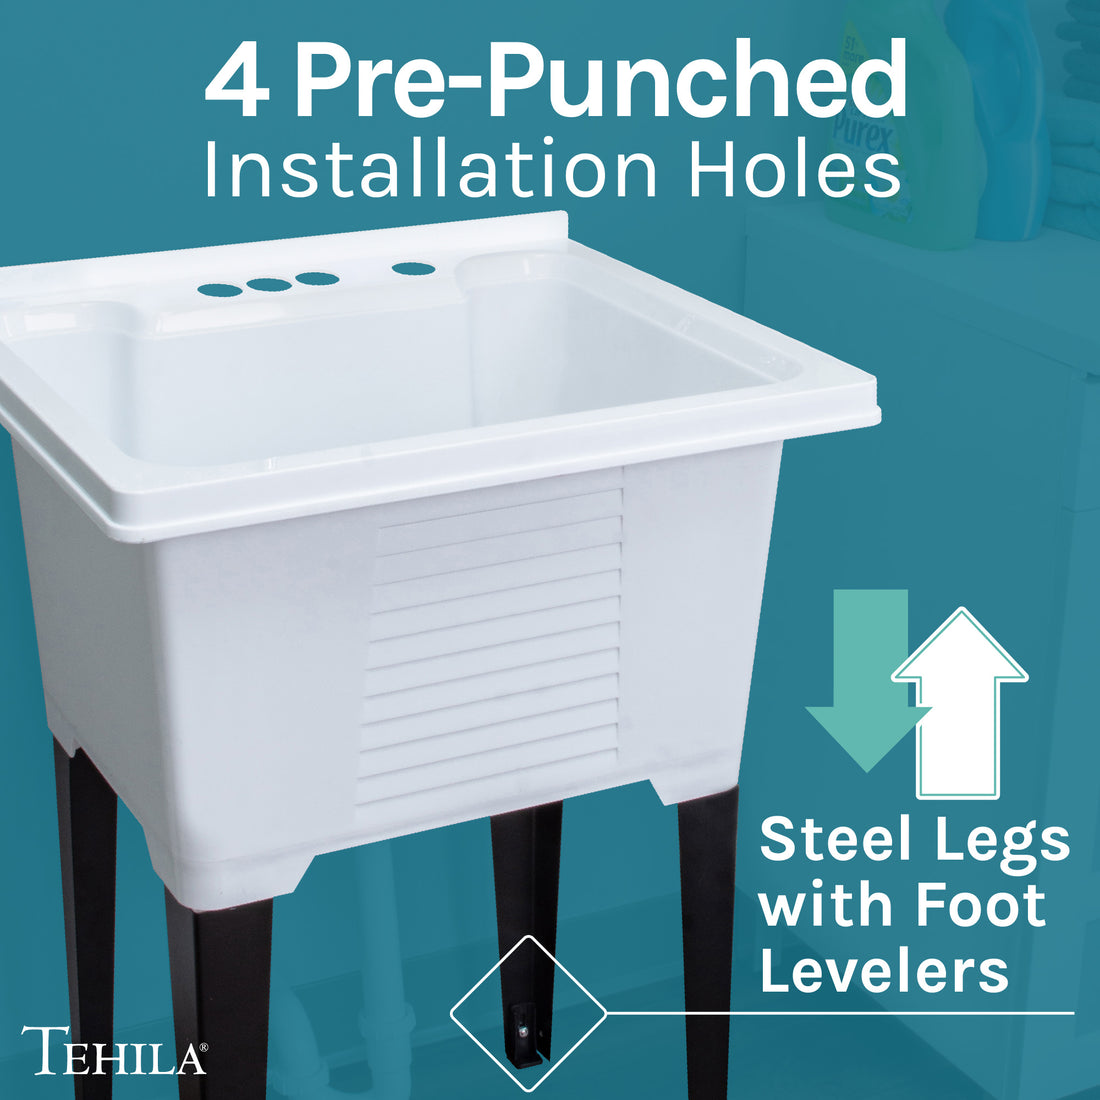 4 Pre-Punched Installation Holes and Steel Legs  with Foot levelers Utility Sink